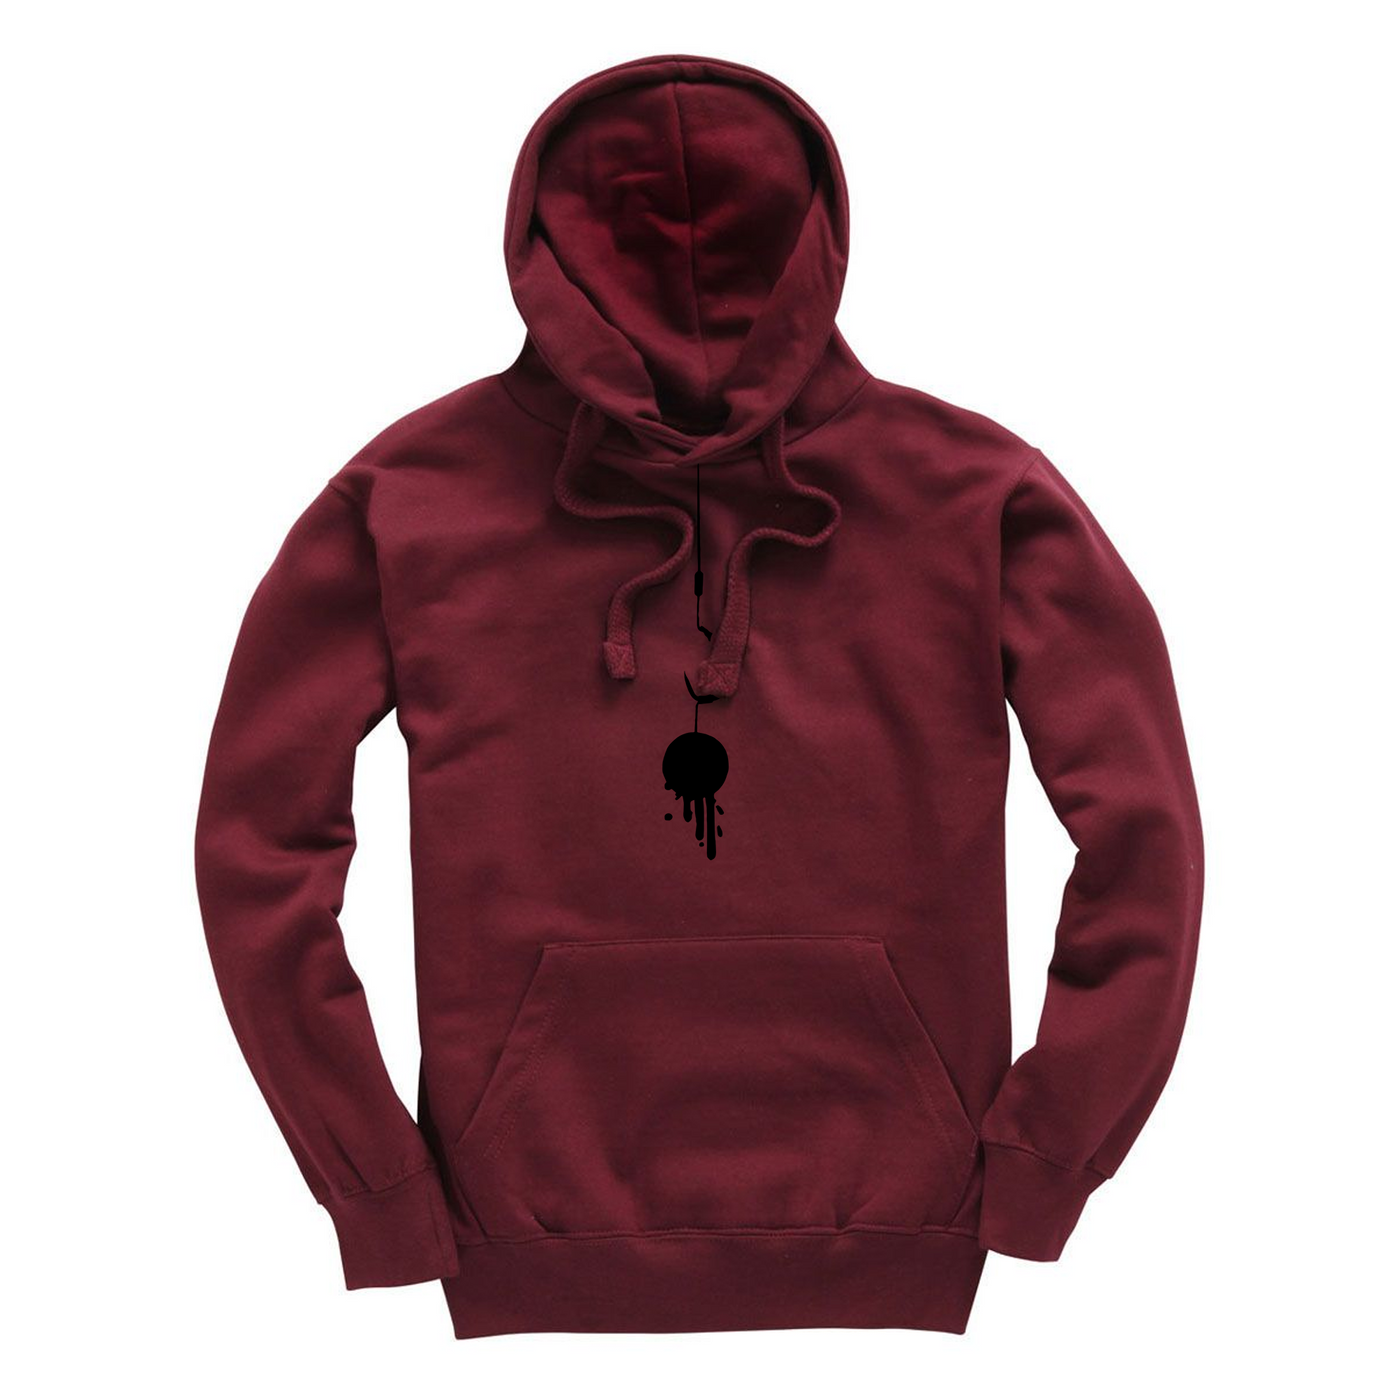 BURGANDY RIGGED OUT HEX STASH HOODY - BLACK FRIDAY SALE